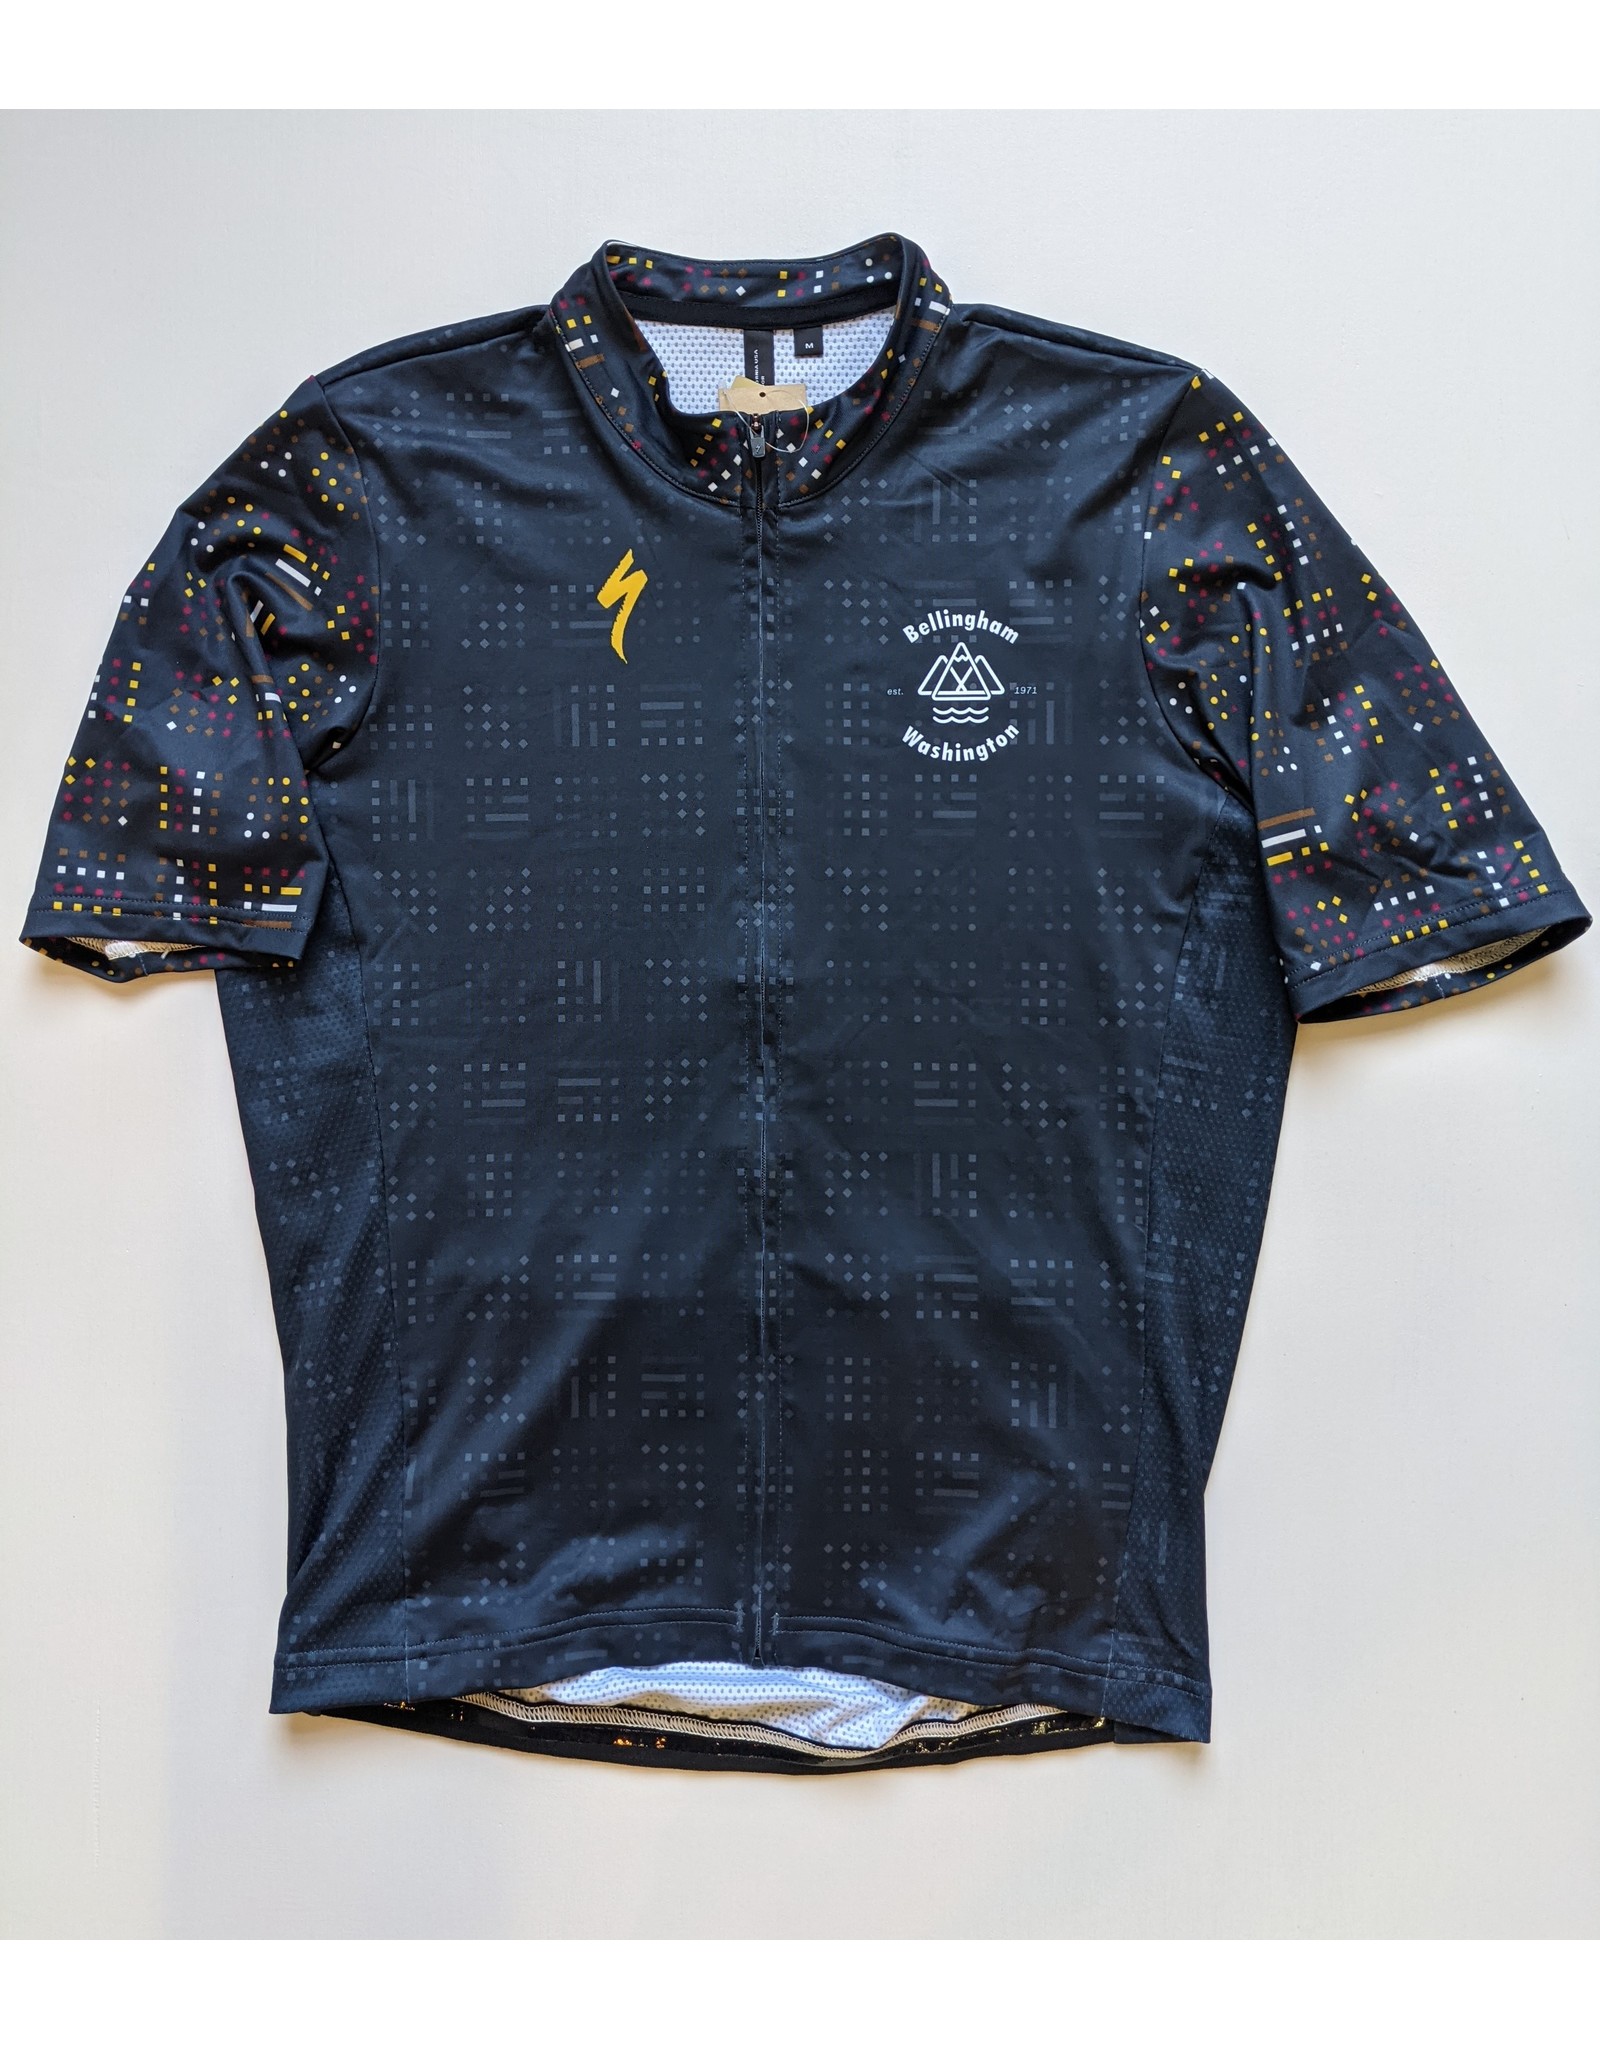 Specialized Fairhaven Bicycles Jersey -Trifecta Print